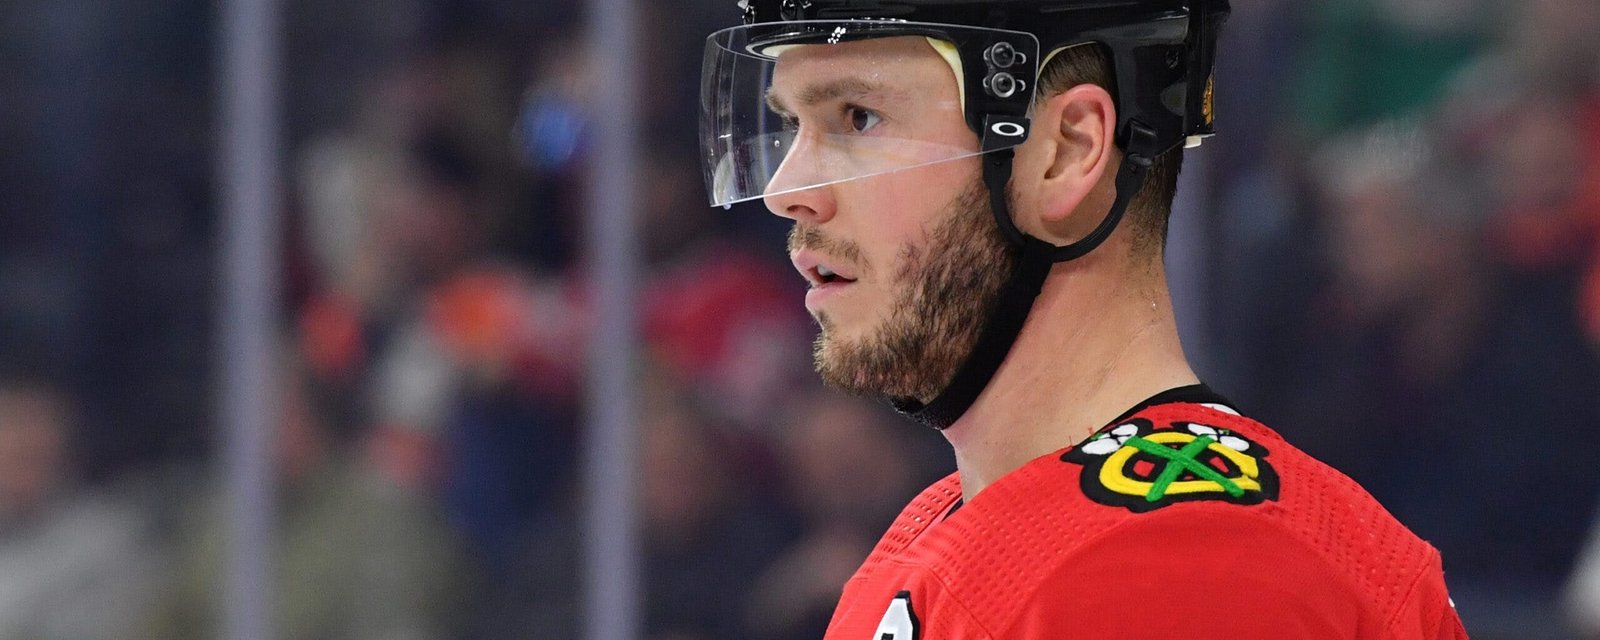 Top candidate emerges as new Blackhawks captain after Toews' departure 